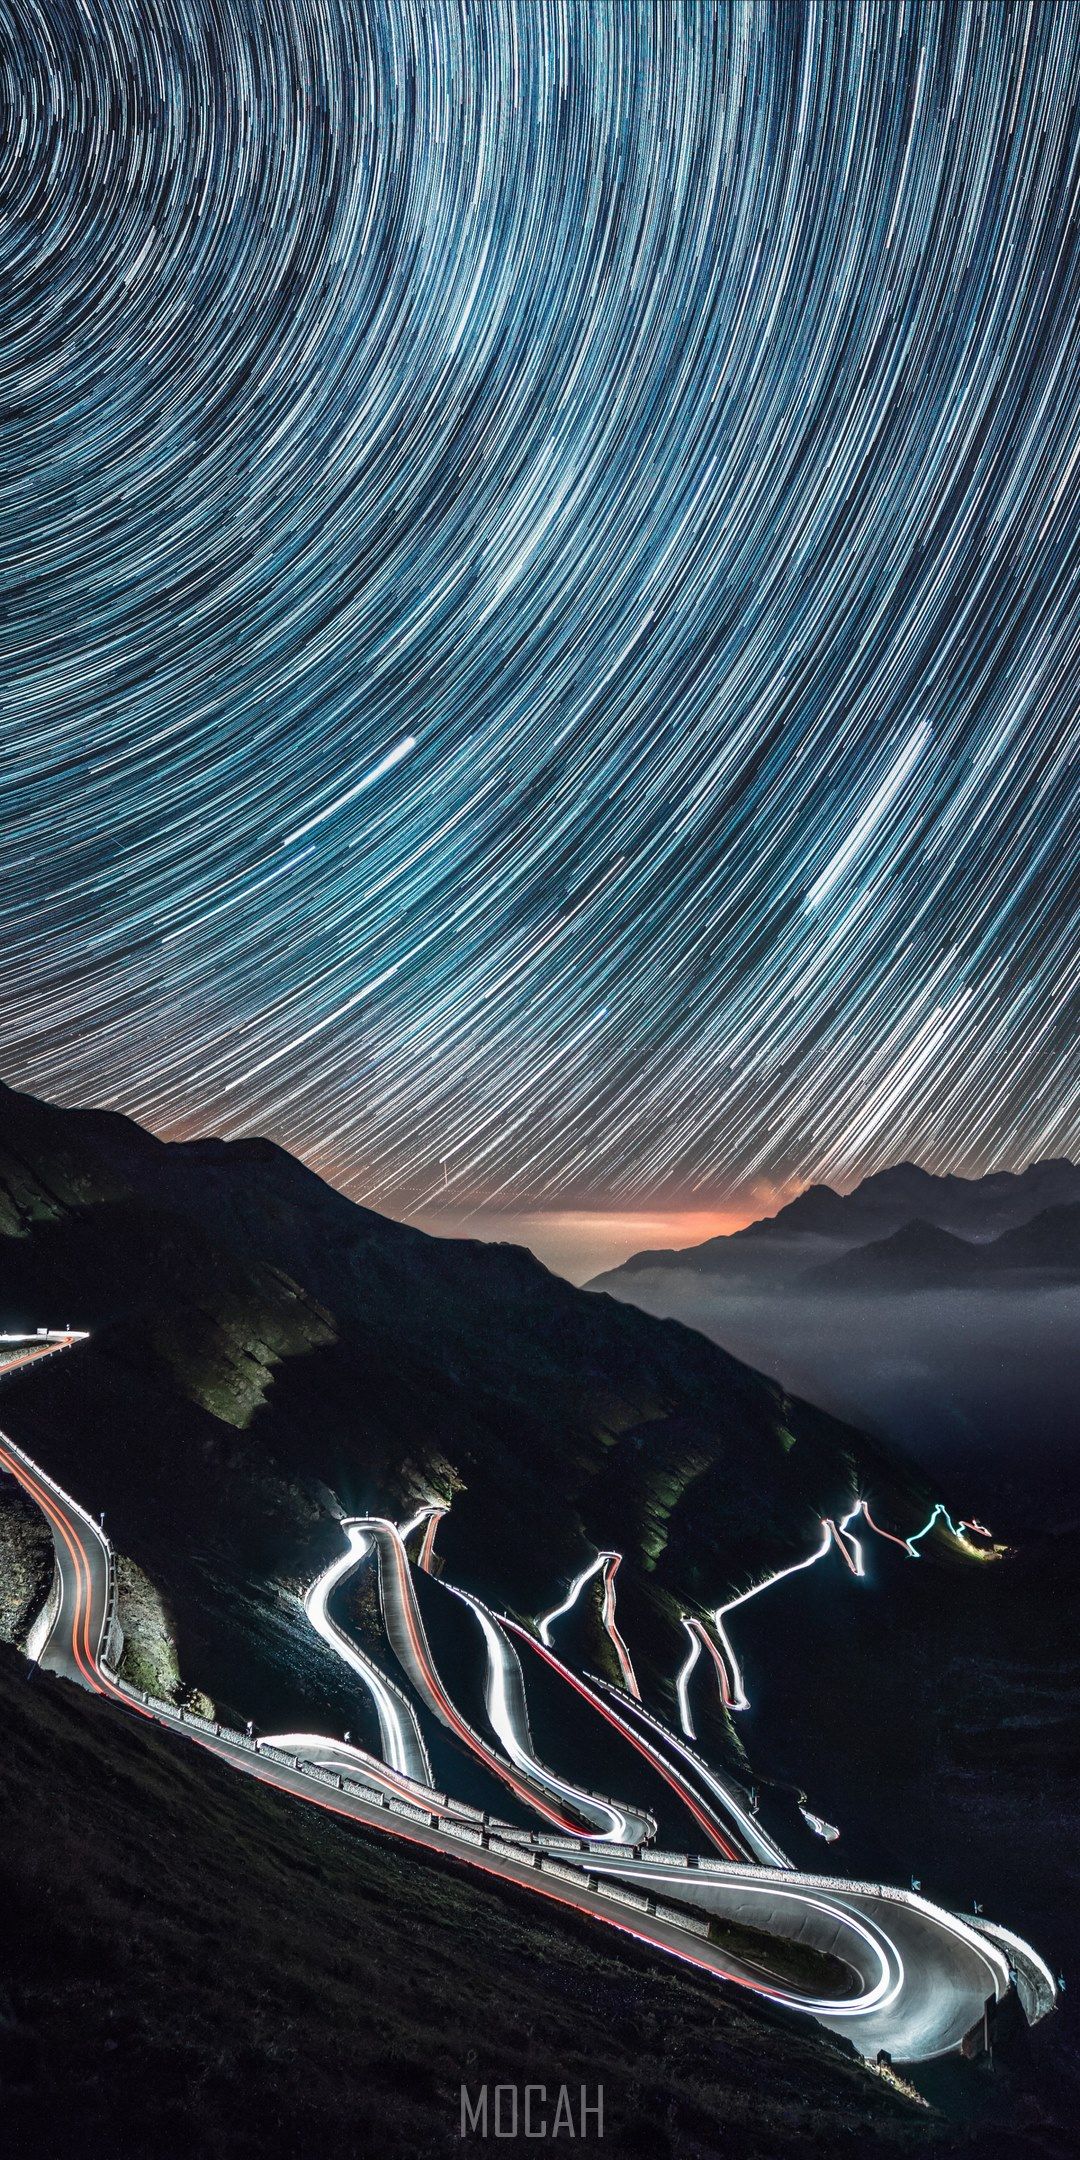 A long exposure of the stars and cars - Road